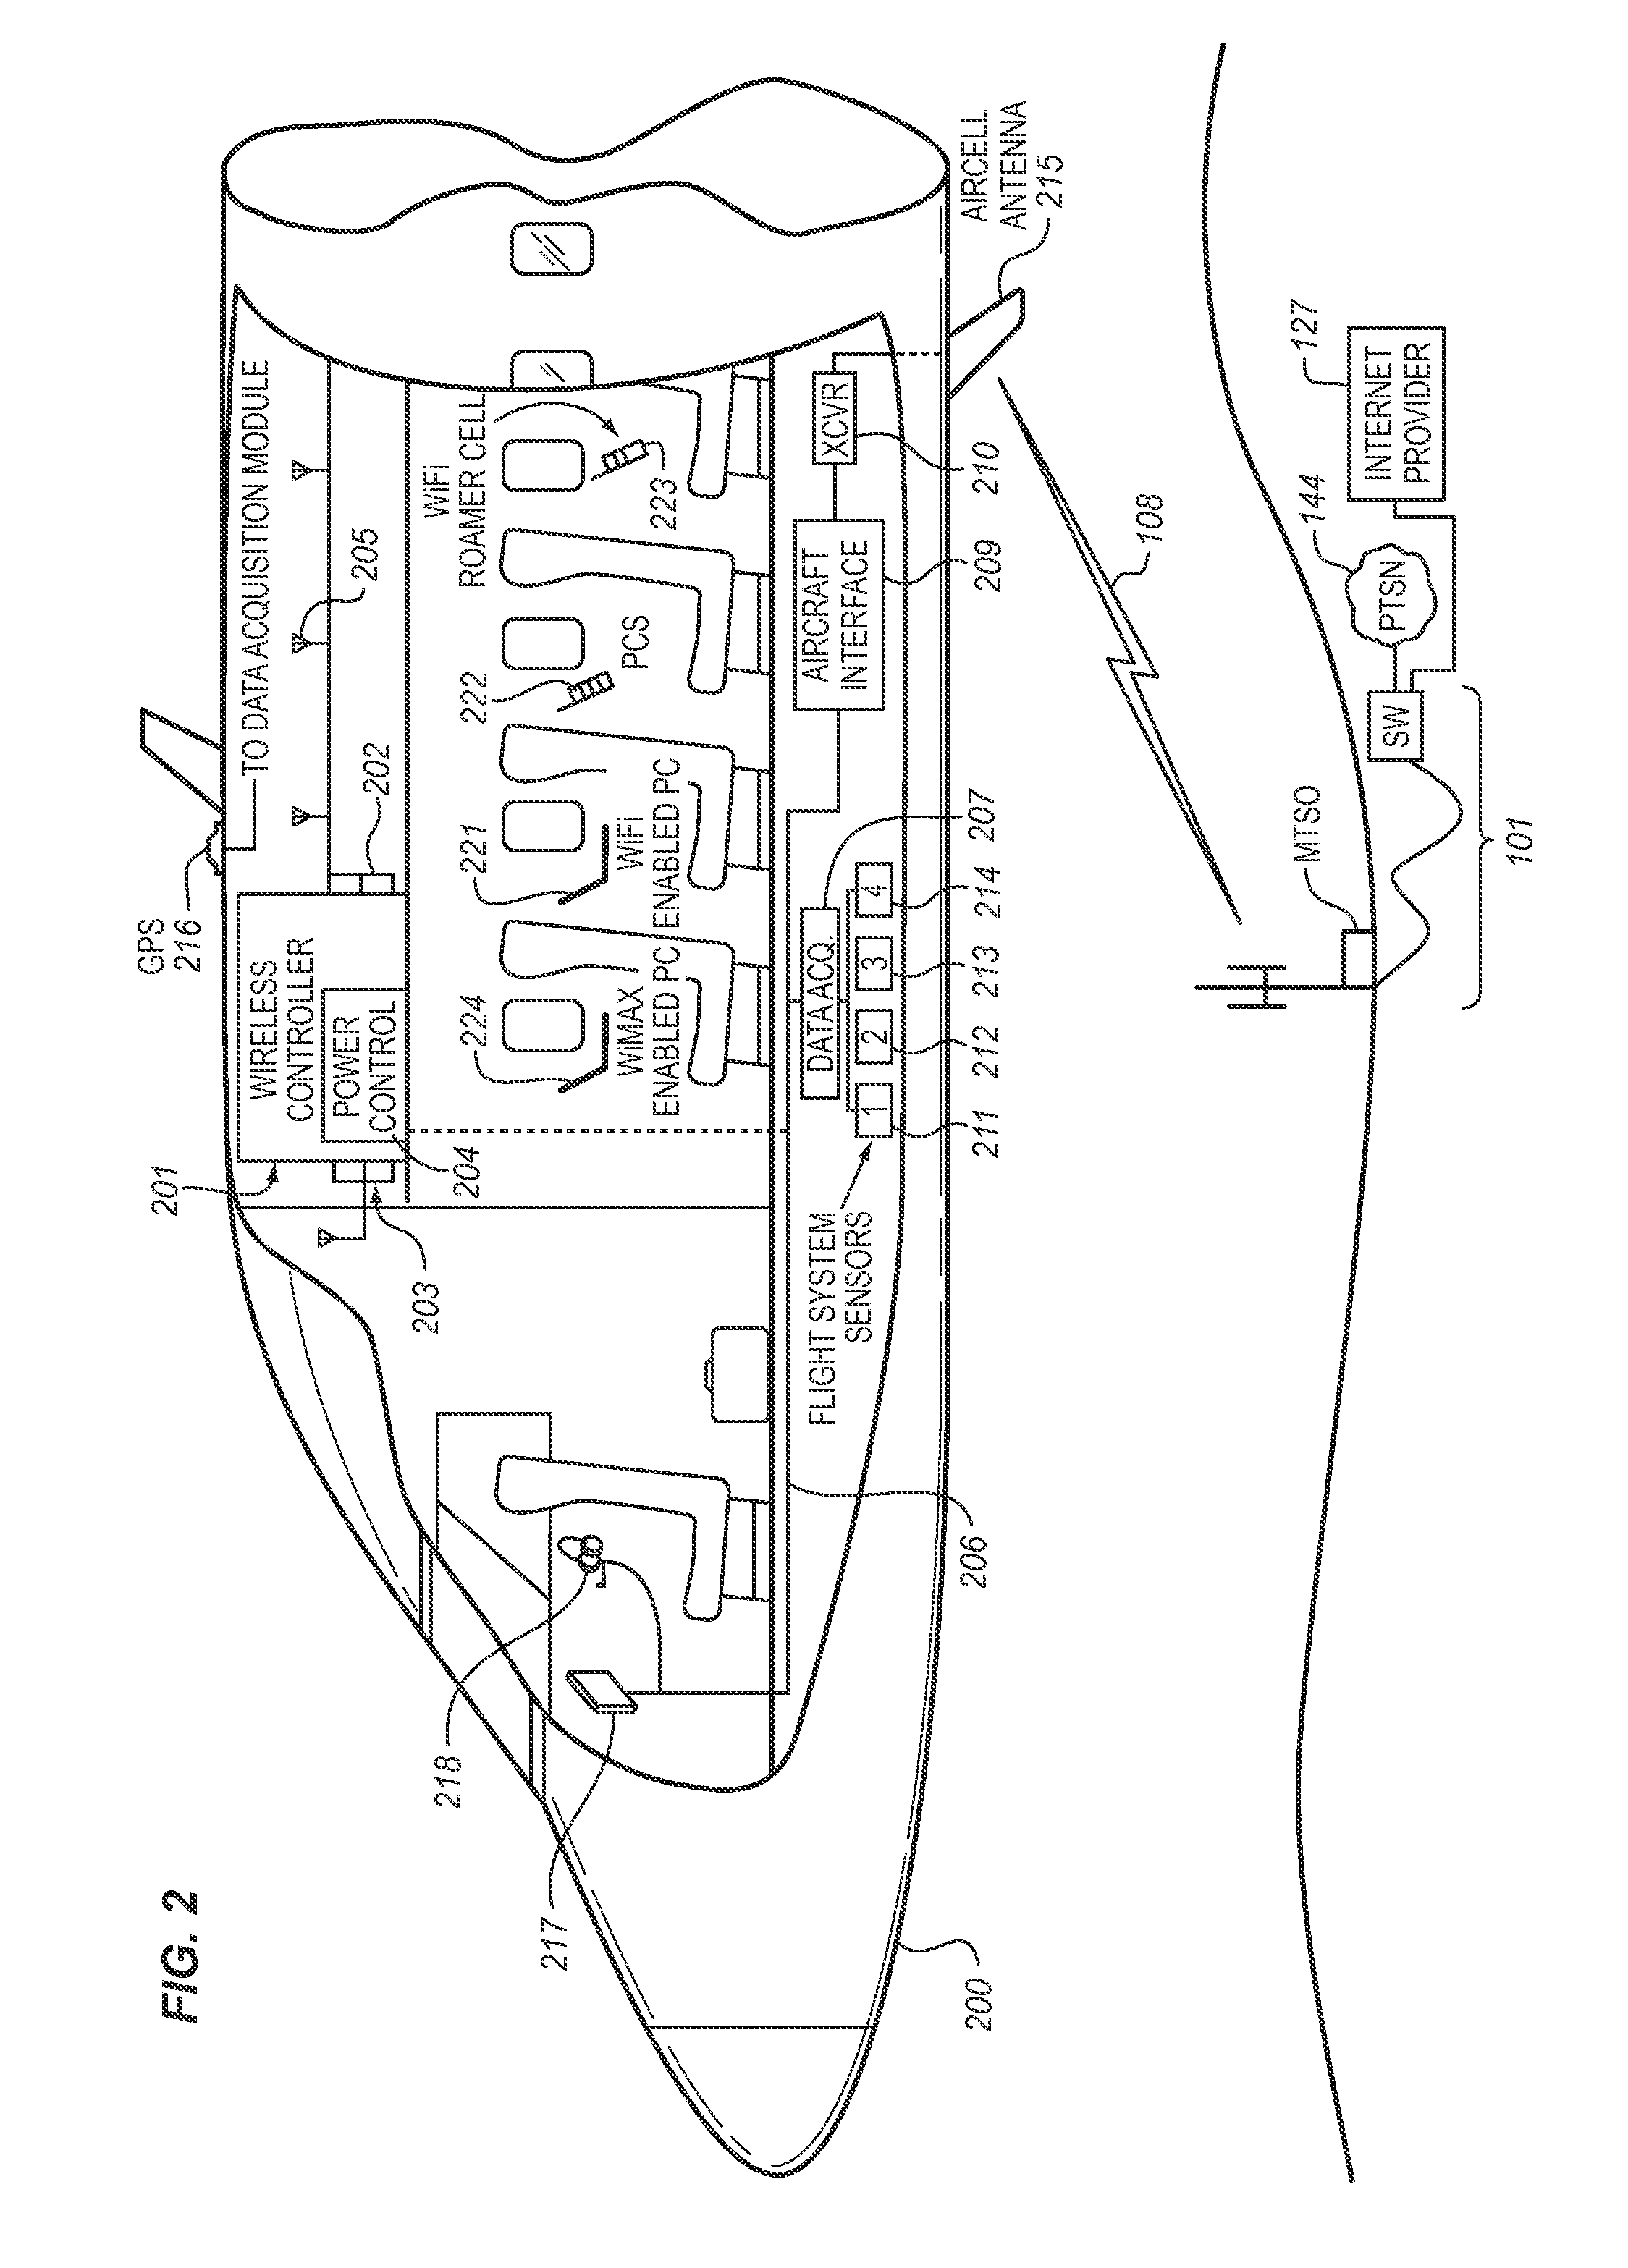 System for managing mobile internet protocol addresses in an airborne wireless cellular network